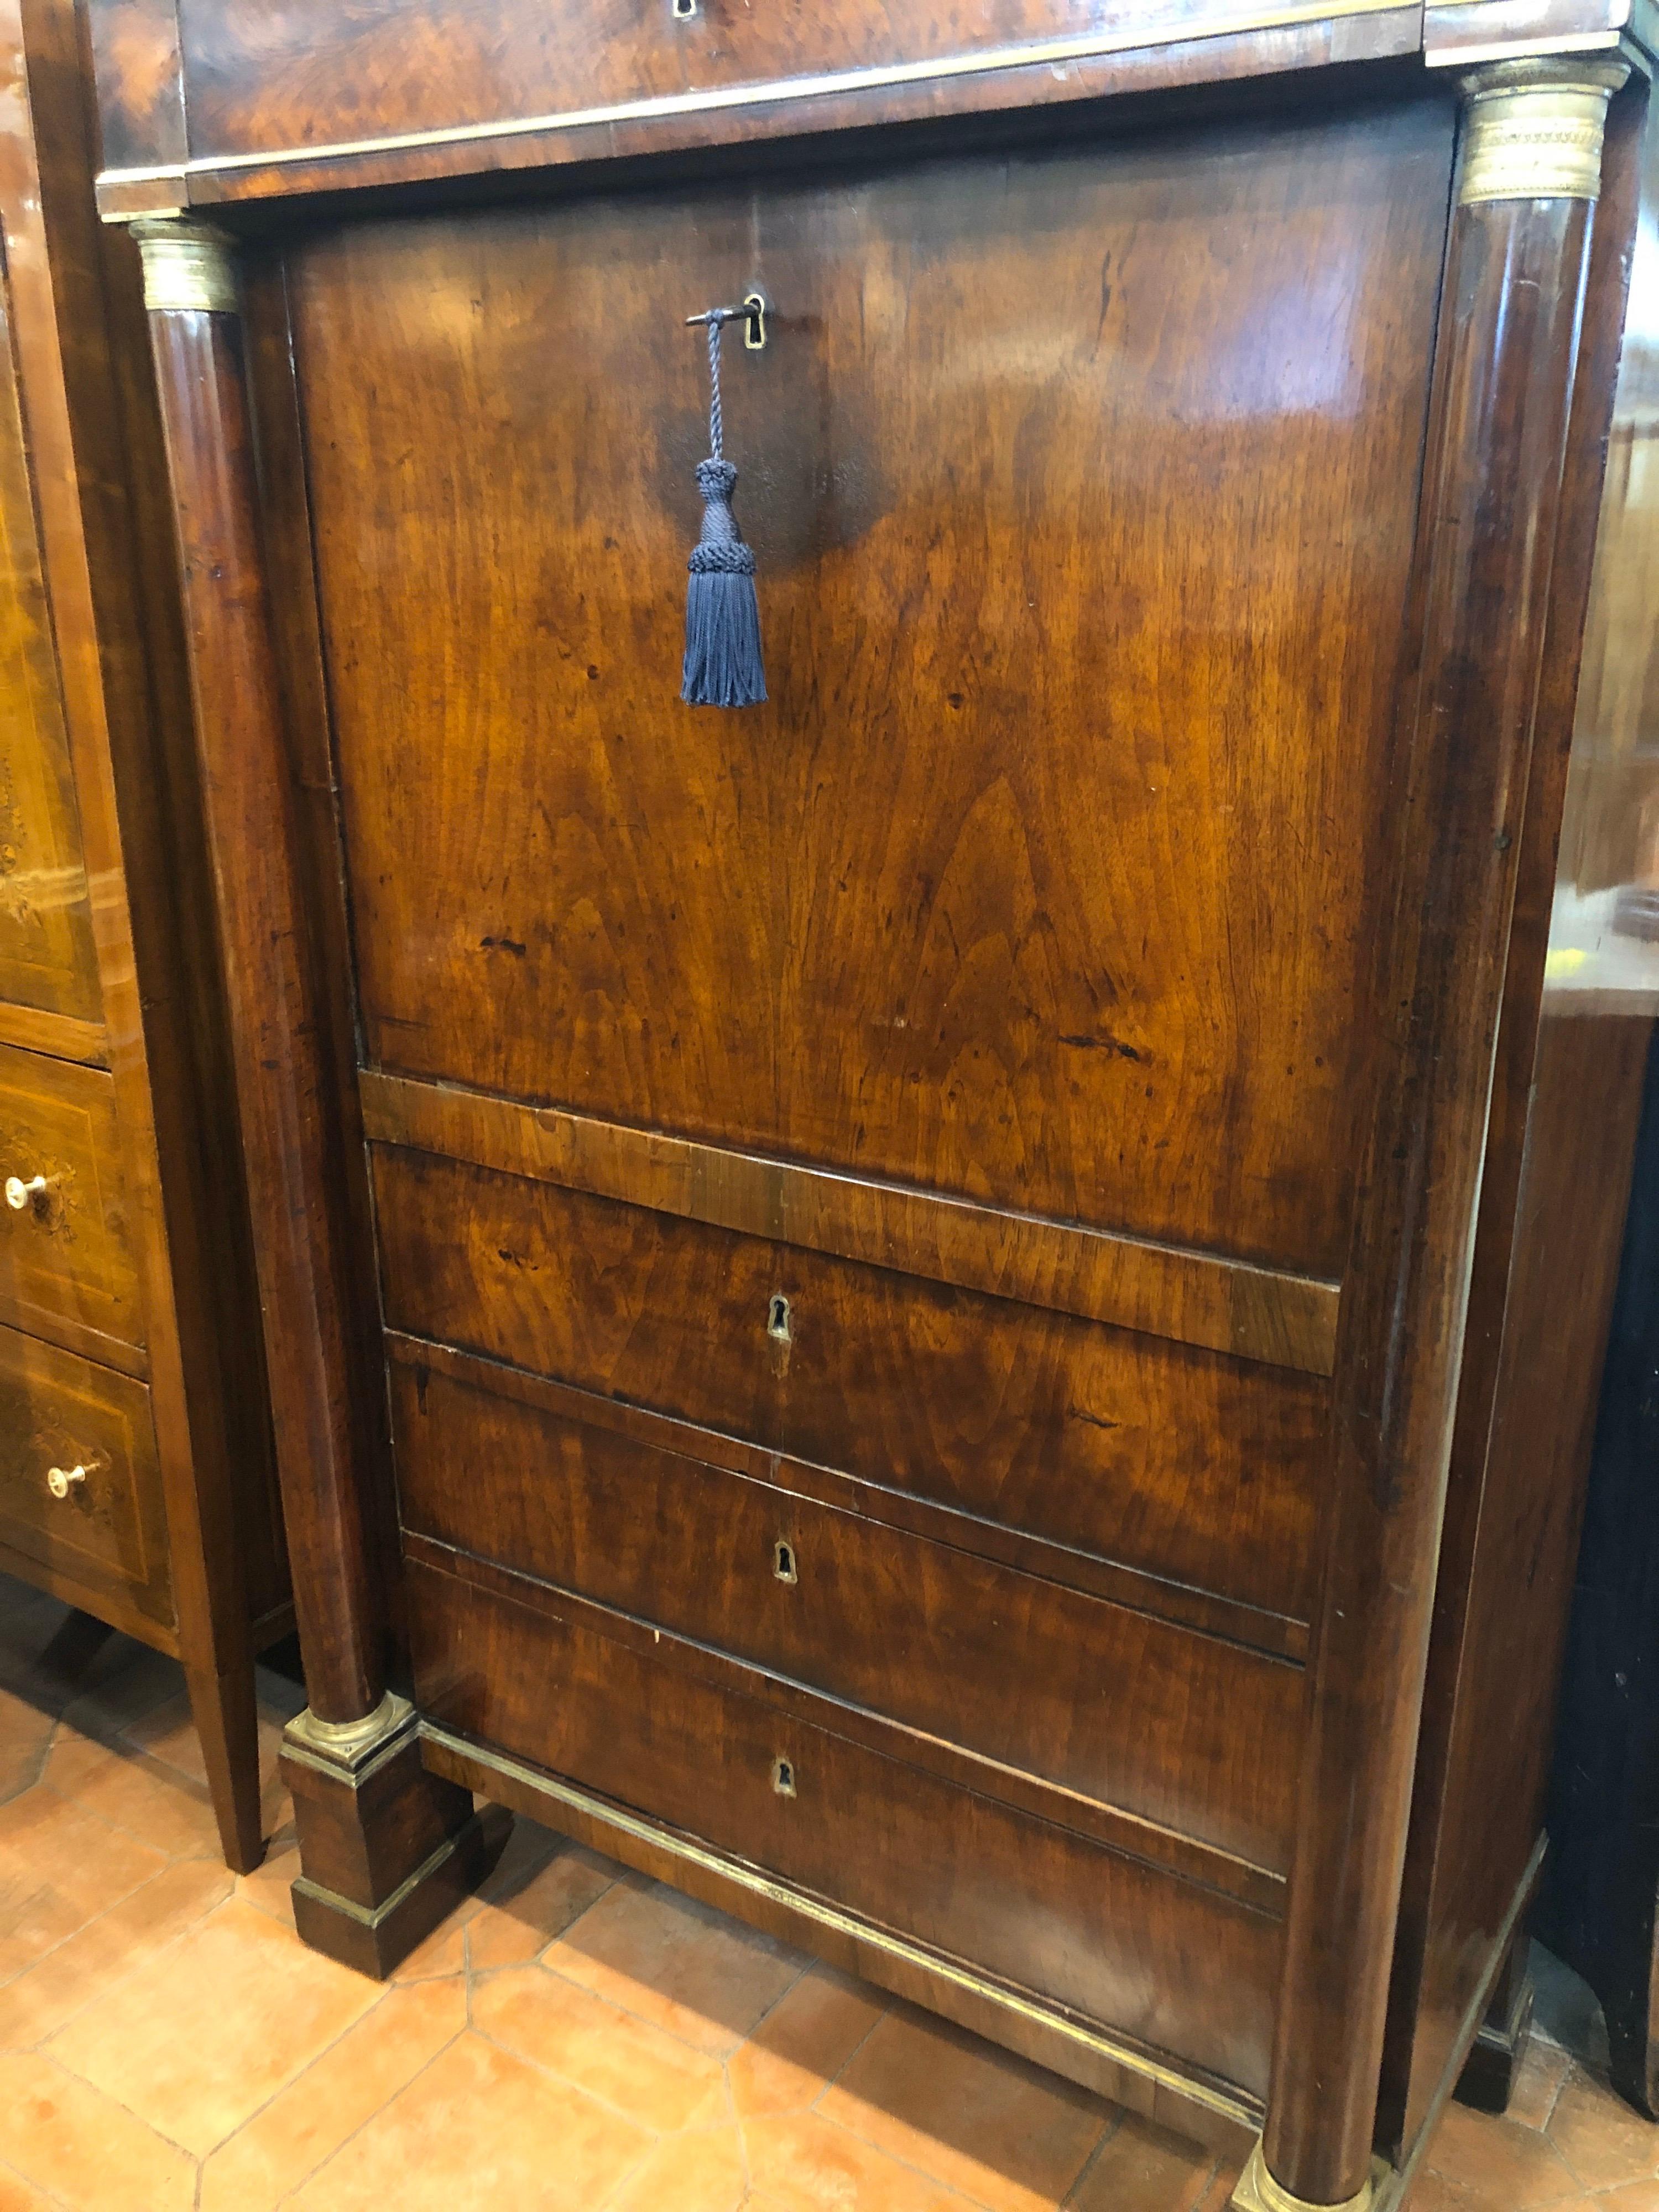 Rare example of Secretaire Lombard Empire, walnut structure, walnut veneer, gold metal applications, first quarter of the nineteenth century
There are three secrets of the mobile that will be revealed only to the final customer ... very difficult